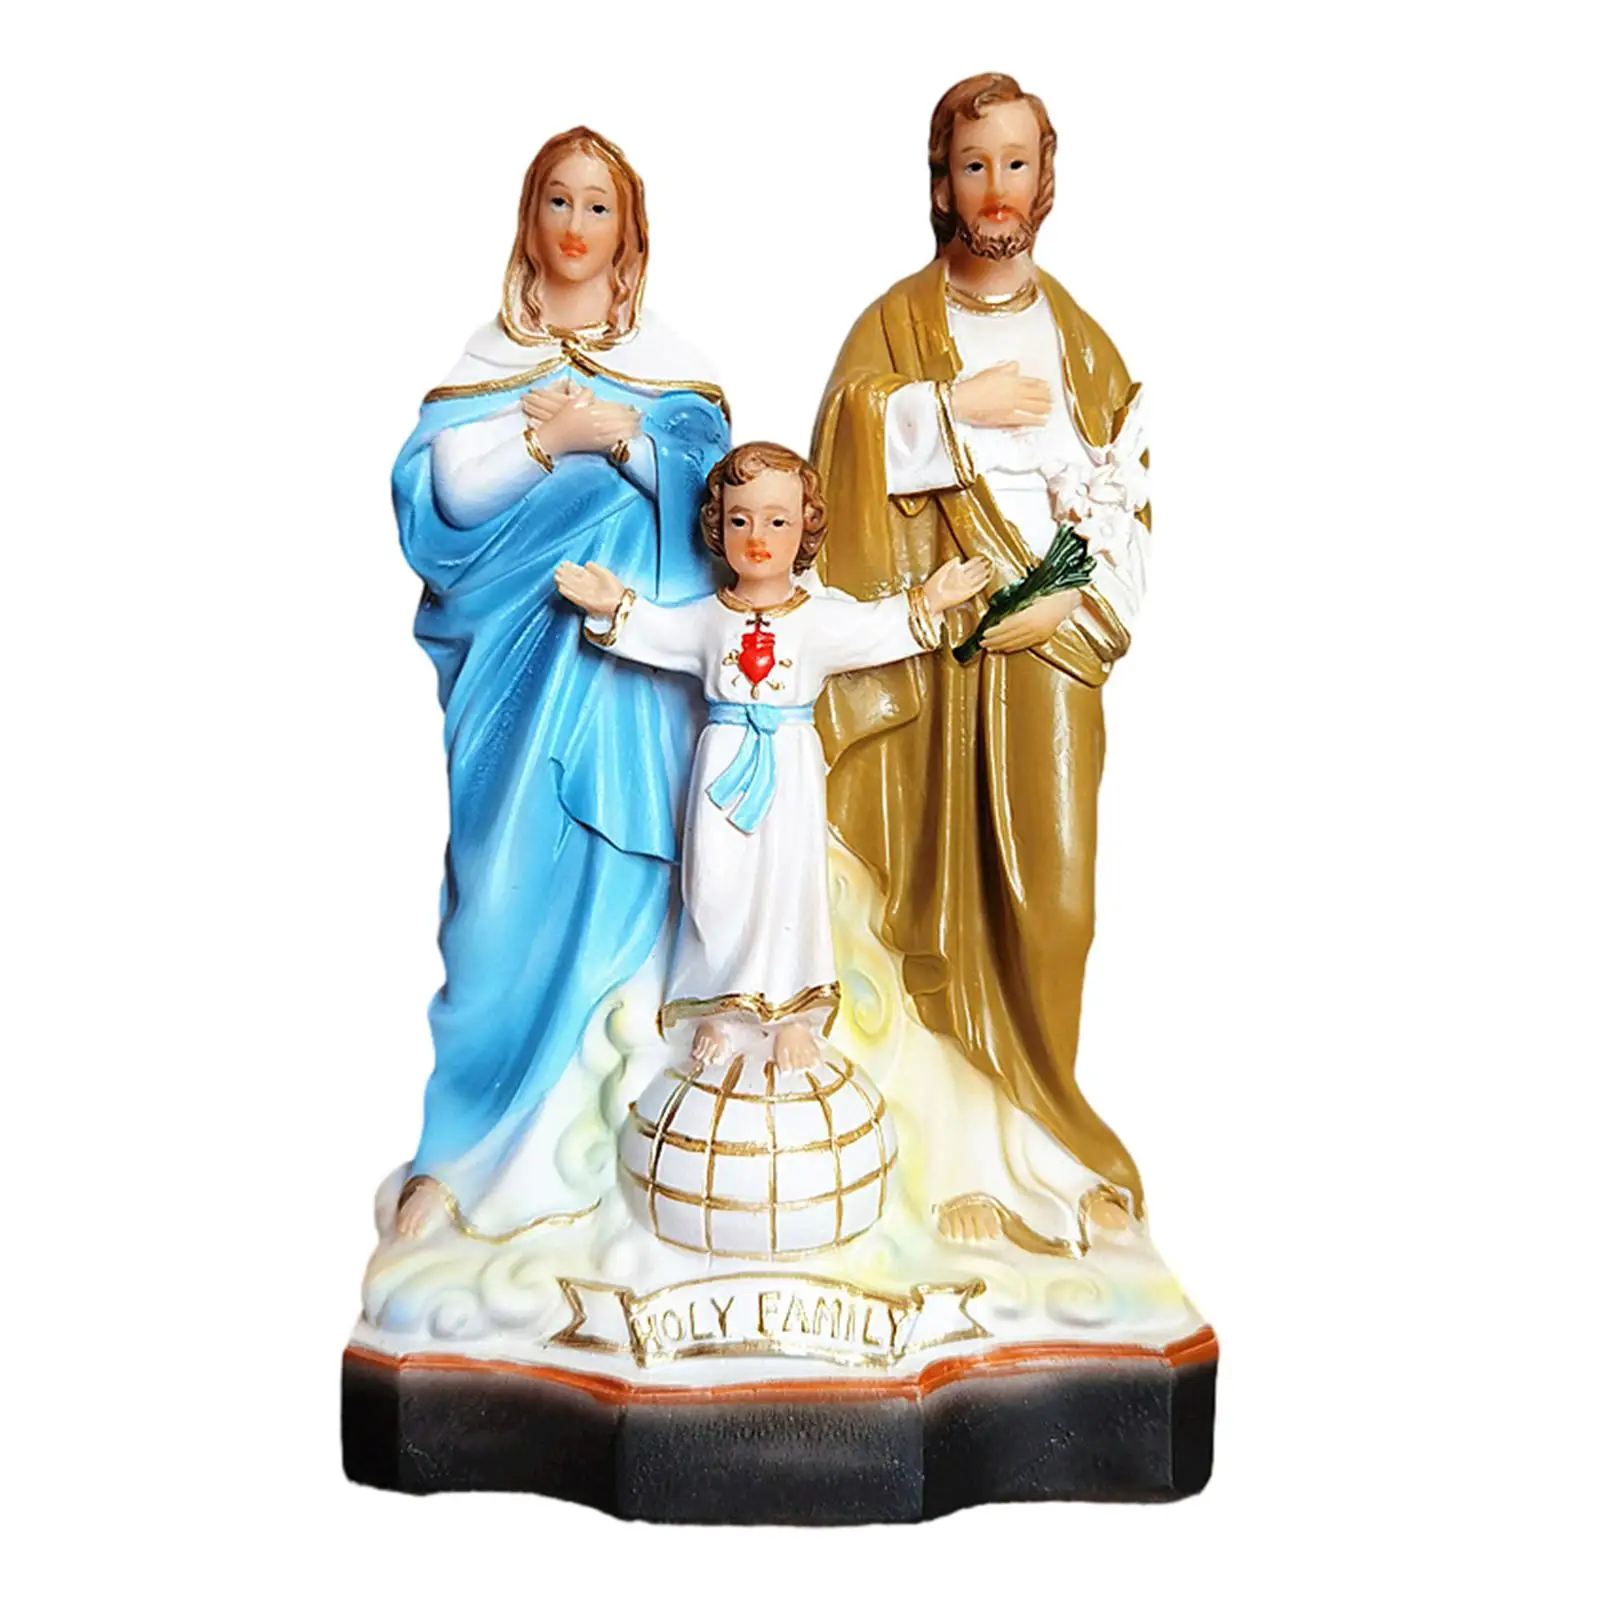 Religious Figure Standing Statue Family Sculpture for Home Office Outdoor